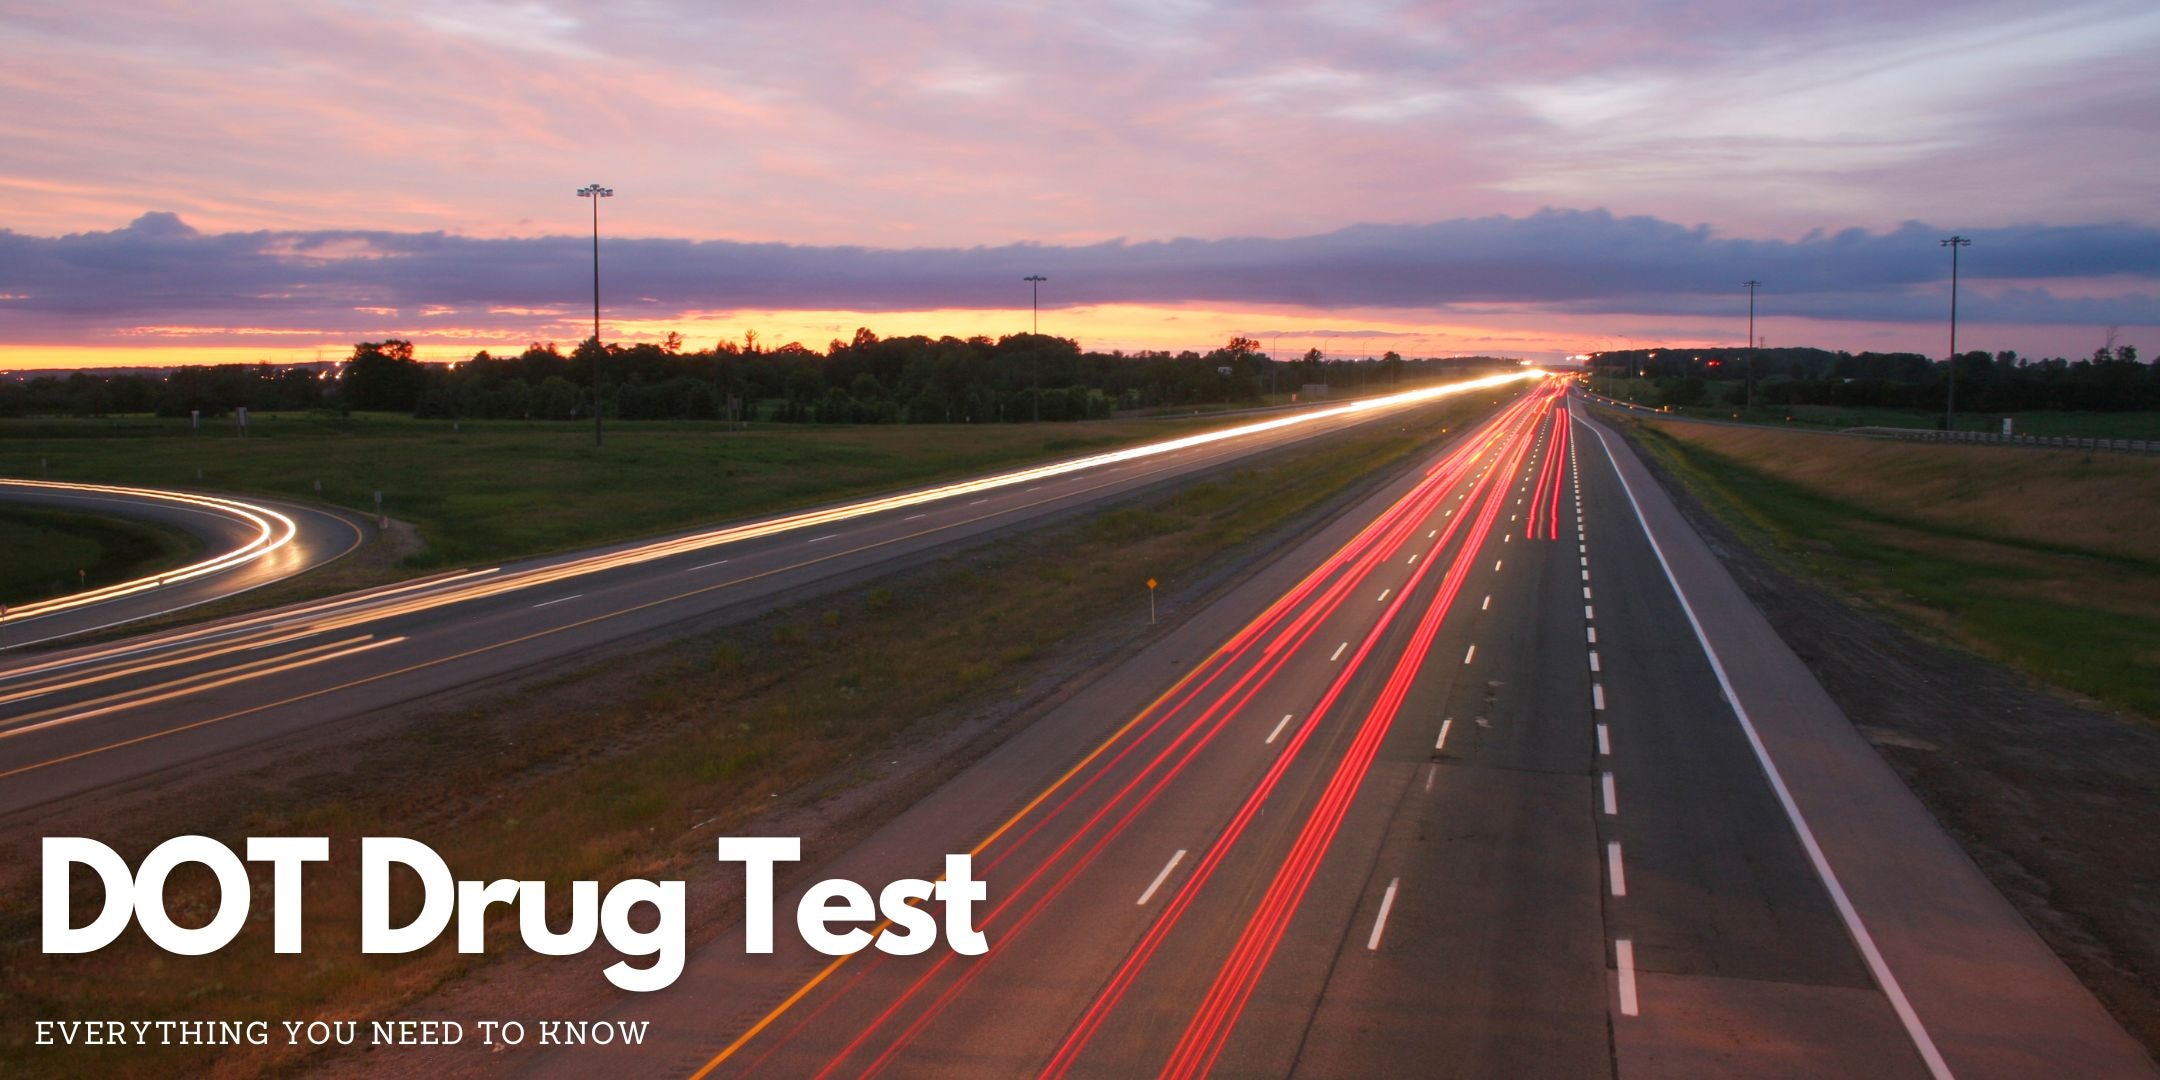 DOT Drug Test: All you Need to Know